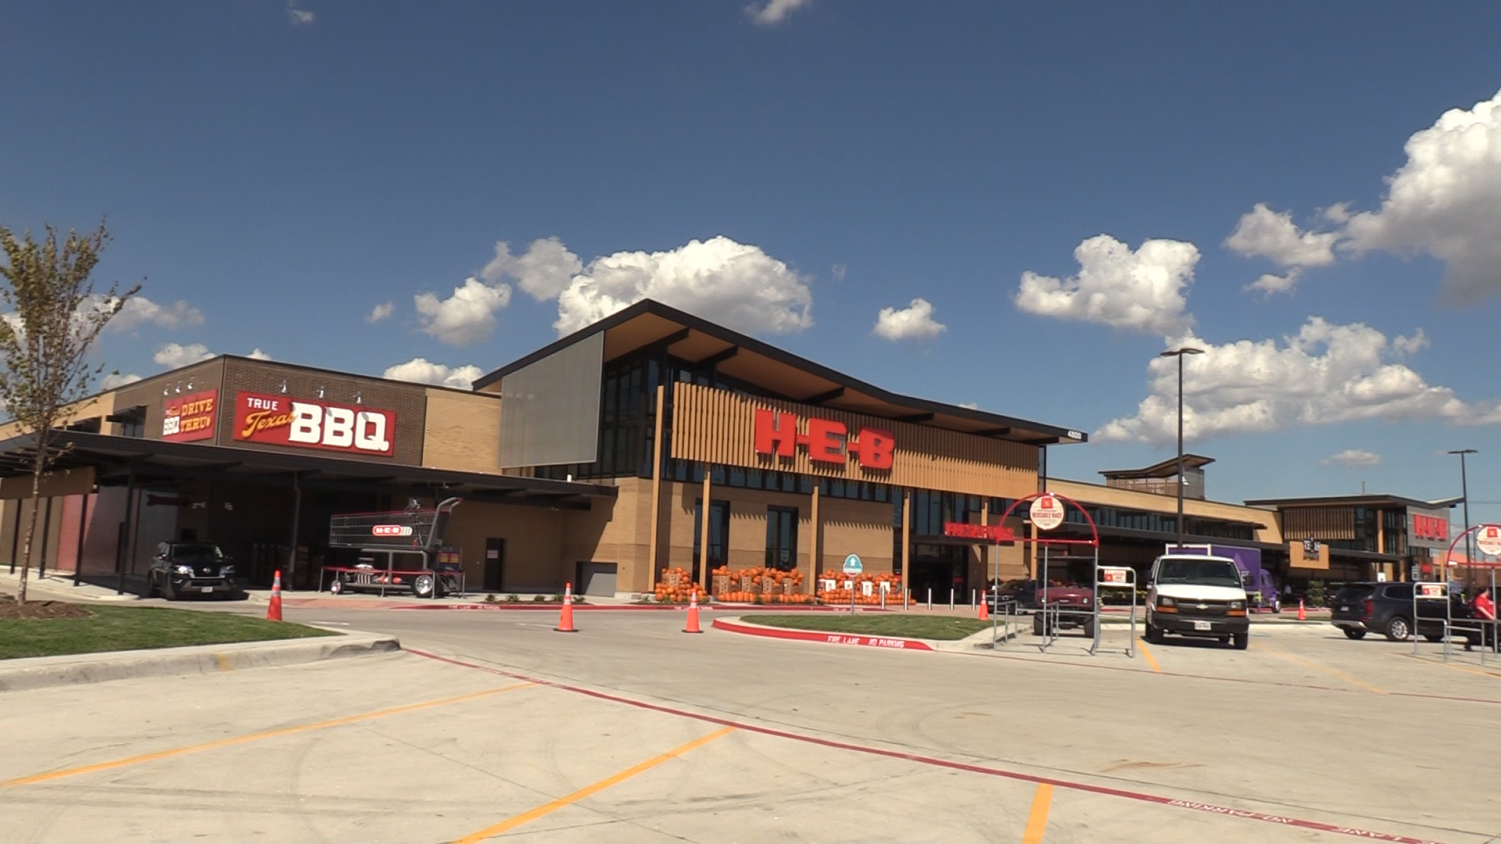 Here+in+Frisco%2C+everythings+better+for+some+as+H-E-B+opens+flagship+store